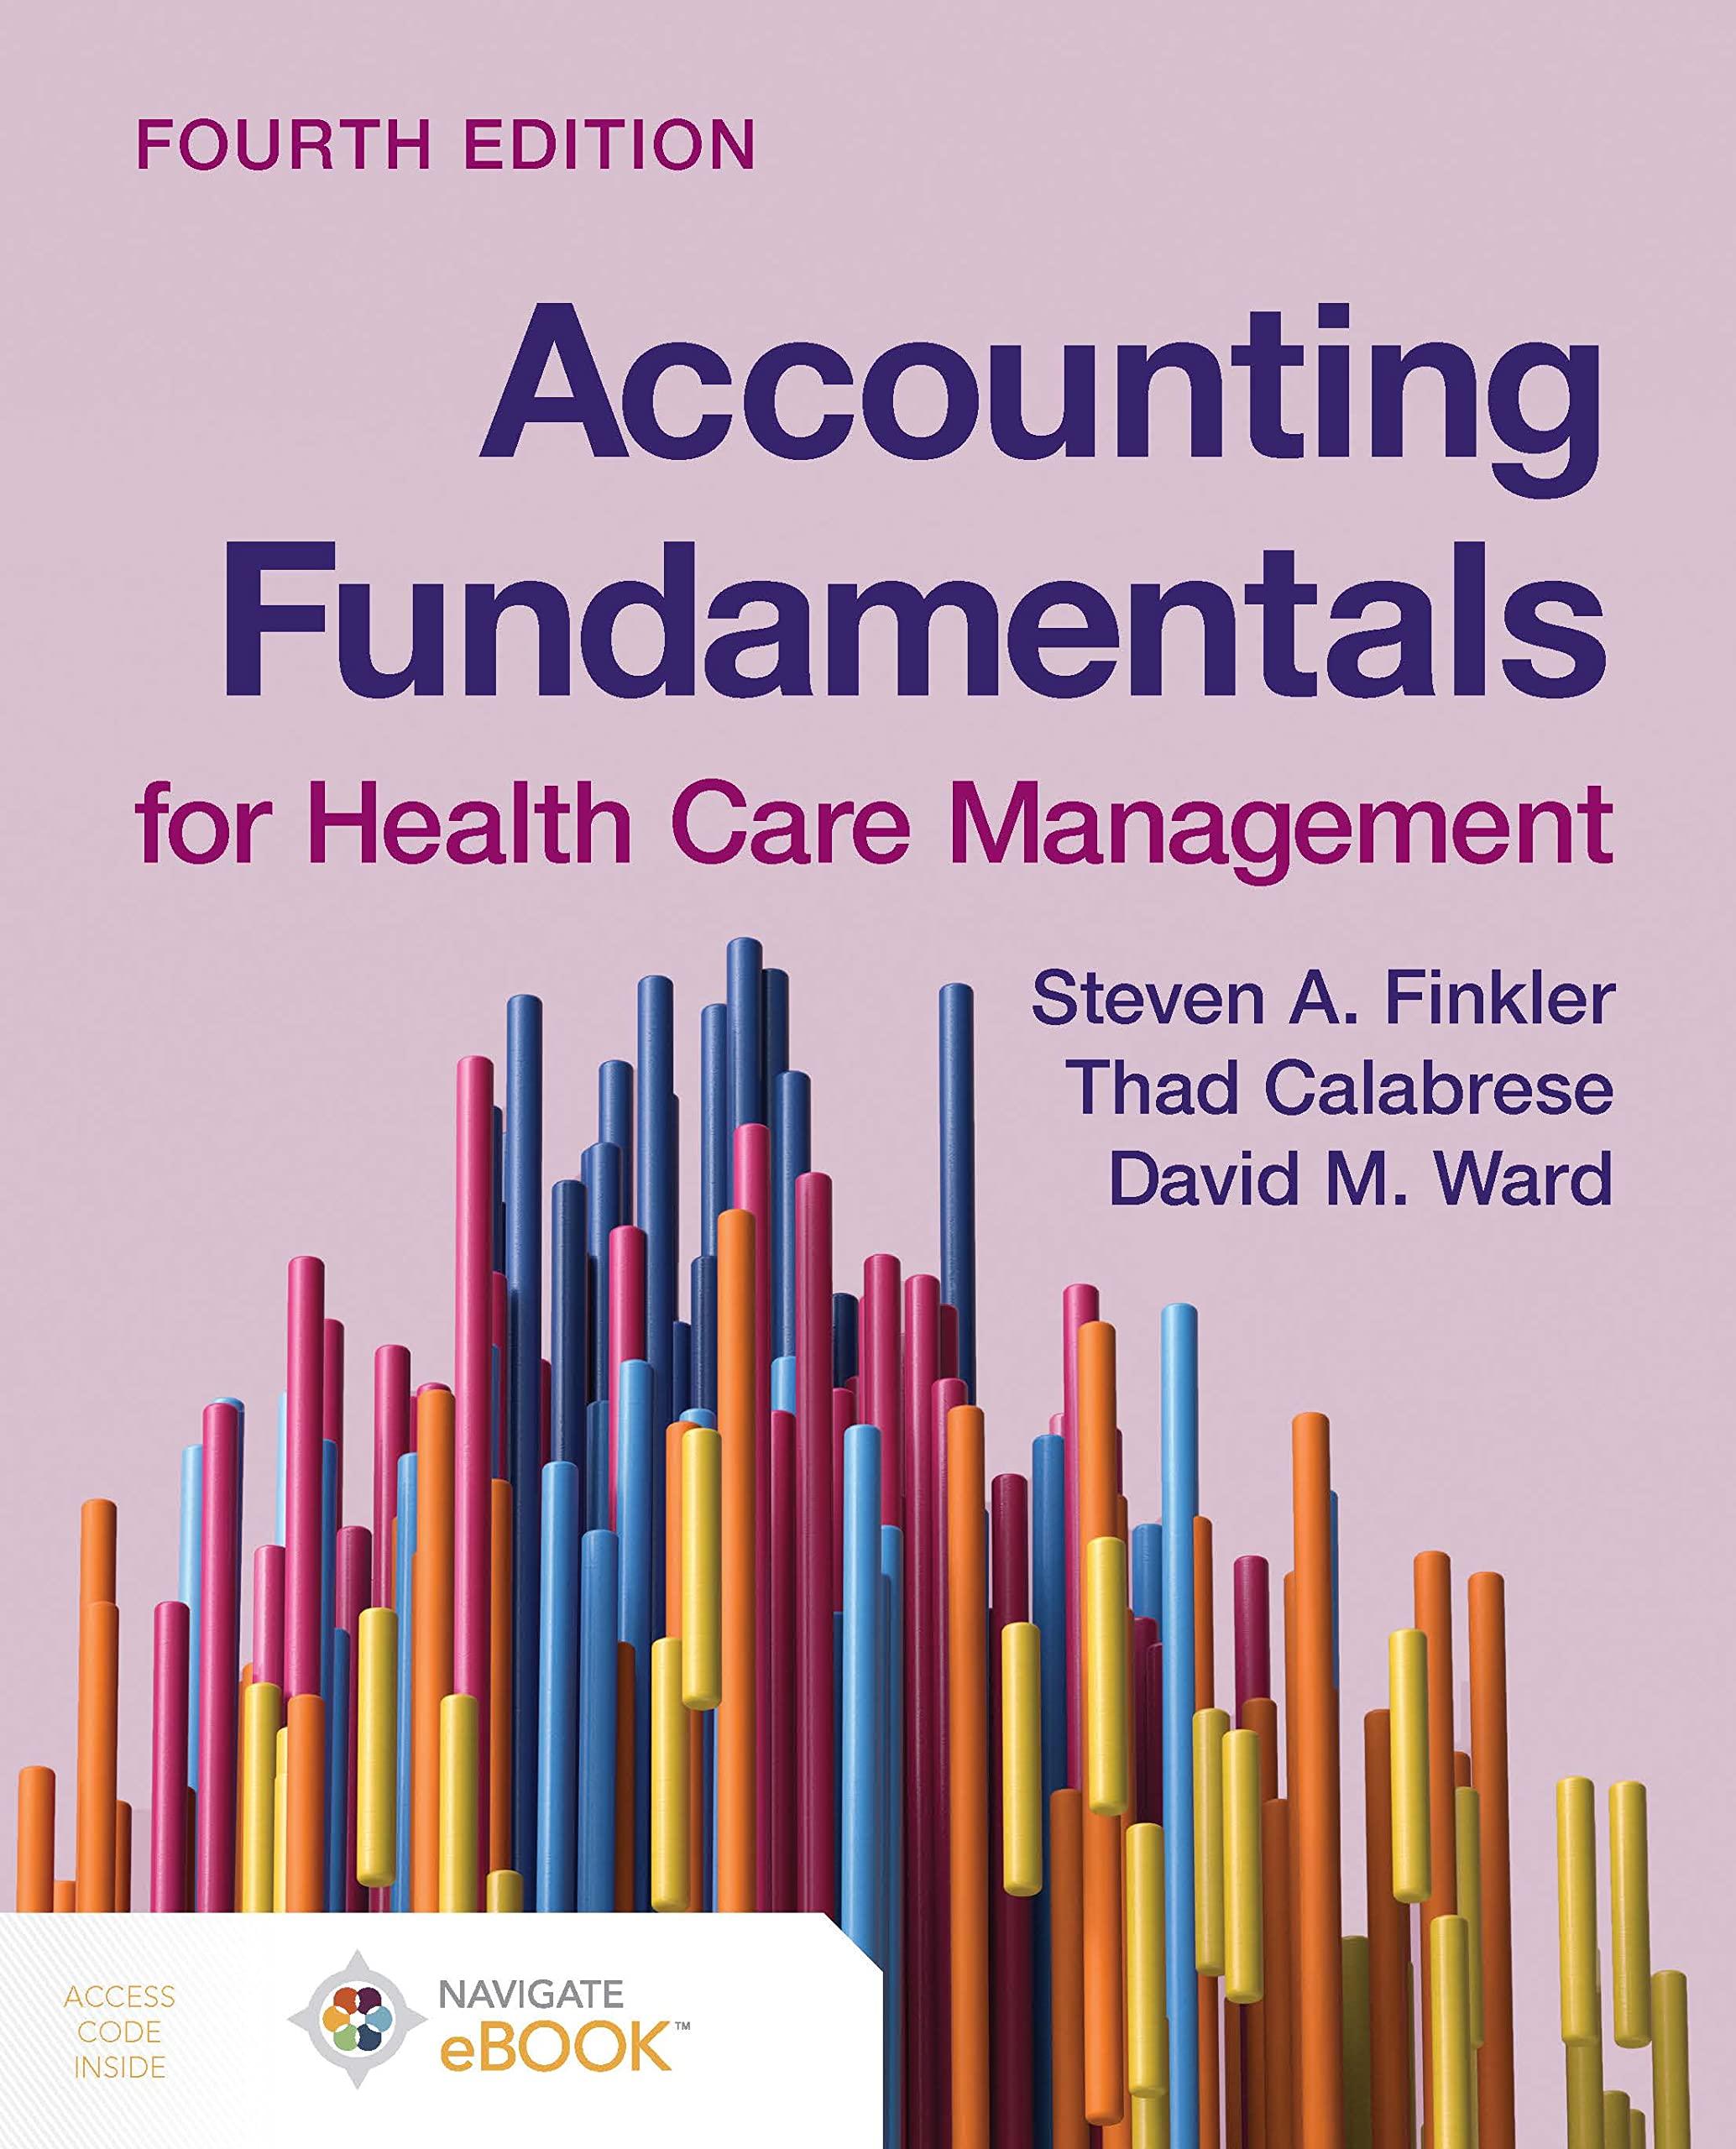 accounting fundamentals for health care management 4th edition steven a. finkler, david m. ward, thad